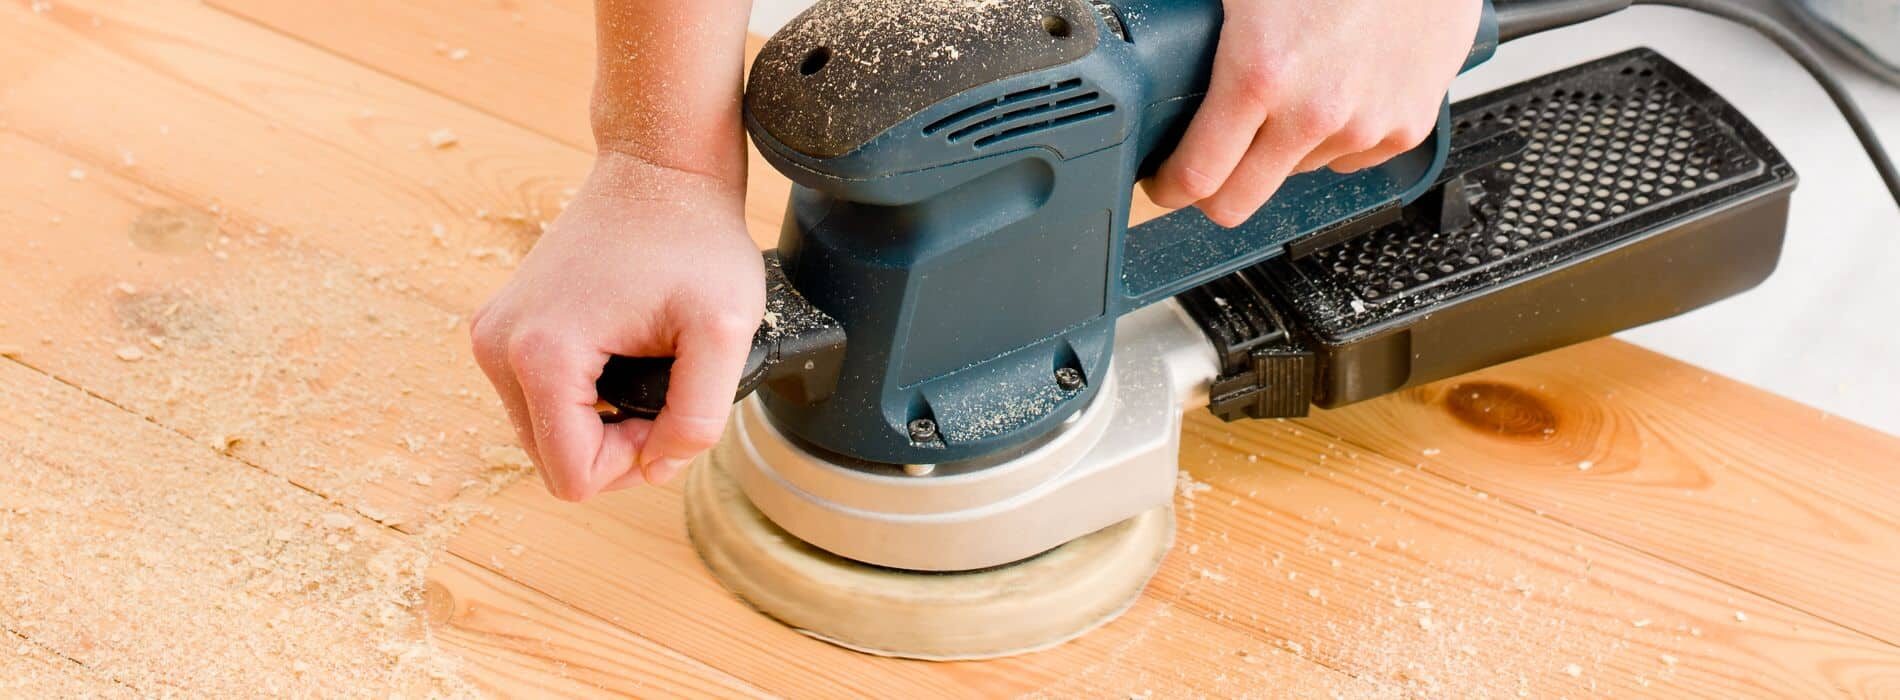 Floor sanding specialists in Catford utilise a 125mm palm sander with 80-grit sandpaper on solid pine flooring.